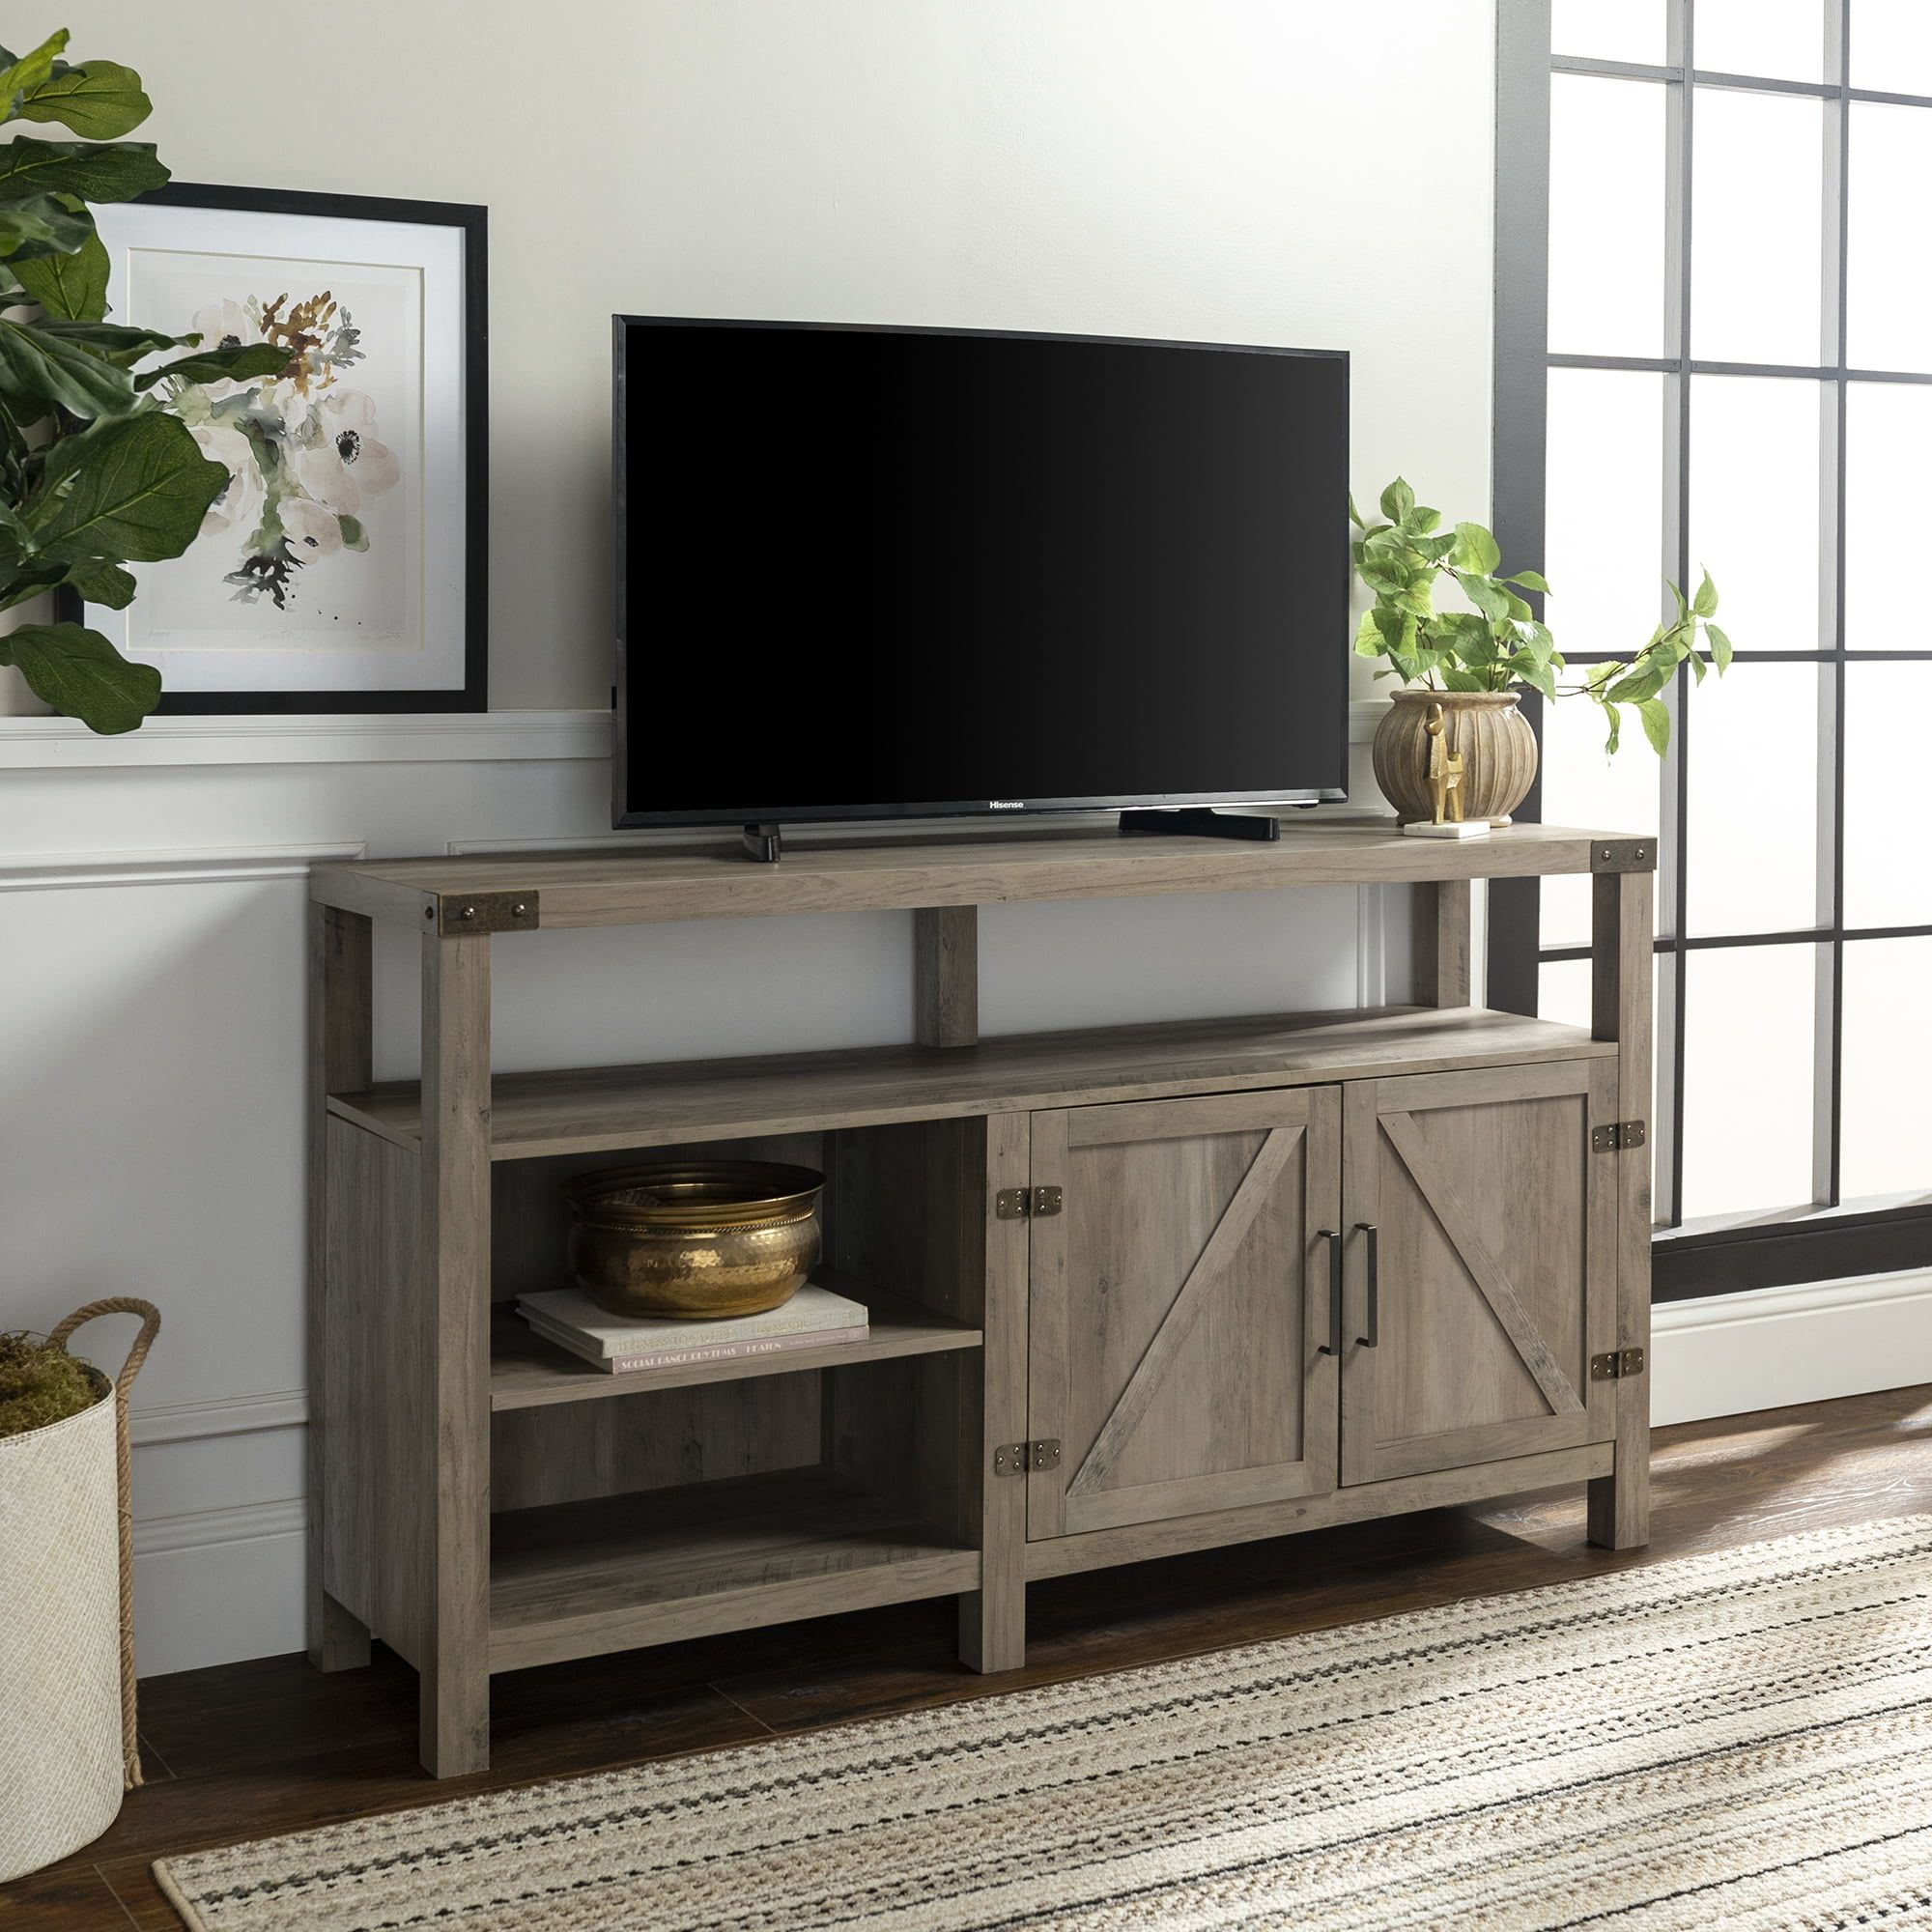 Manor Park Modern Farmhouse Tall Barn Door Tv Stand For Tv's Up To 64 Intended For Farmhouse Stands For Tvs (Gallery 1 of 20)